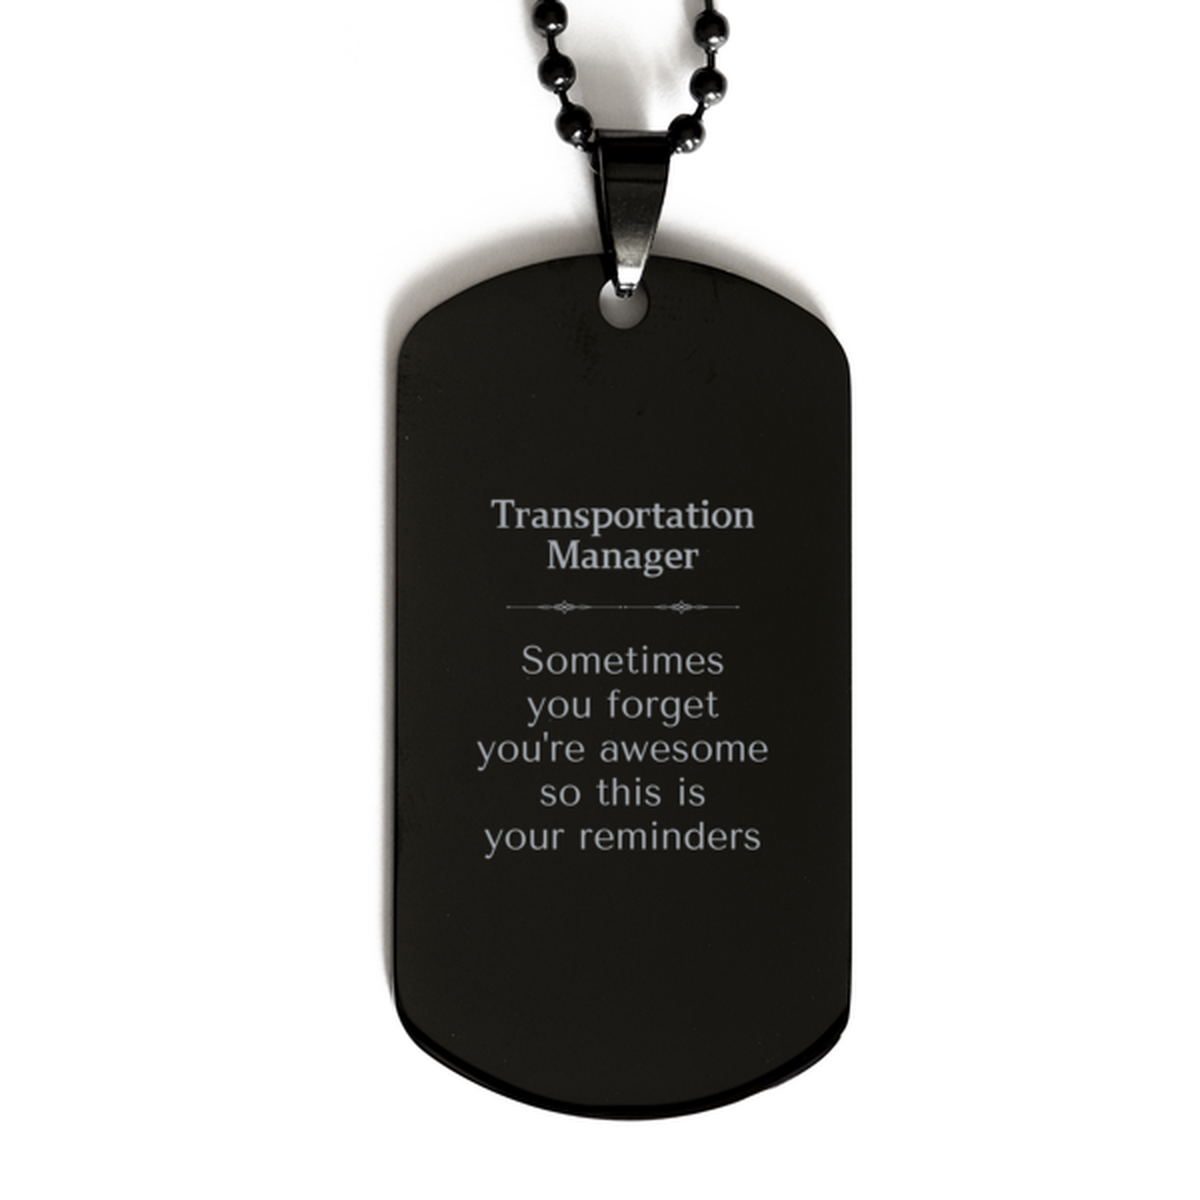 Sentimental Transportation Manager Black Dog Tag, Transportation Manager Sometimes you forget you're awesome so this is your reminders, Graduation Christmas Birthday Gifts for Transportation Manager, Men, Women, Coworkers